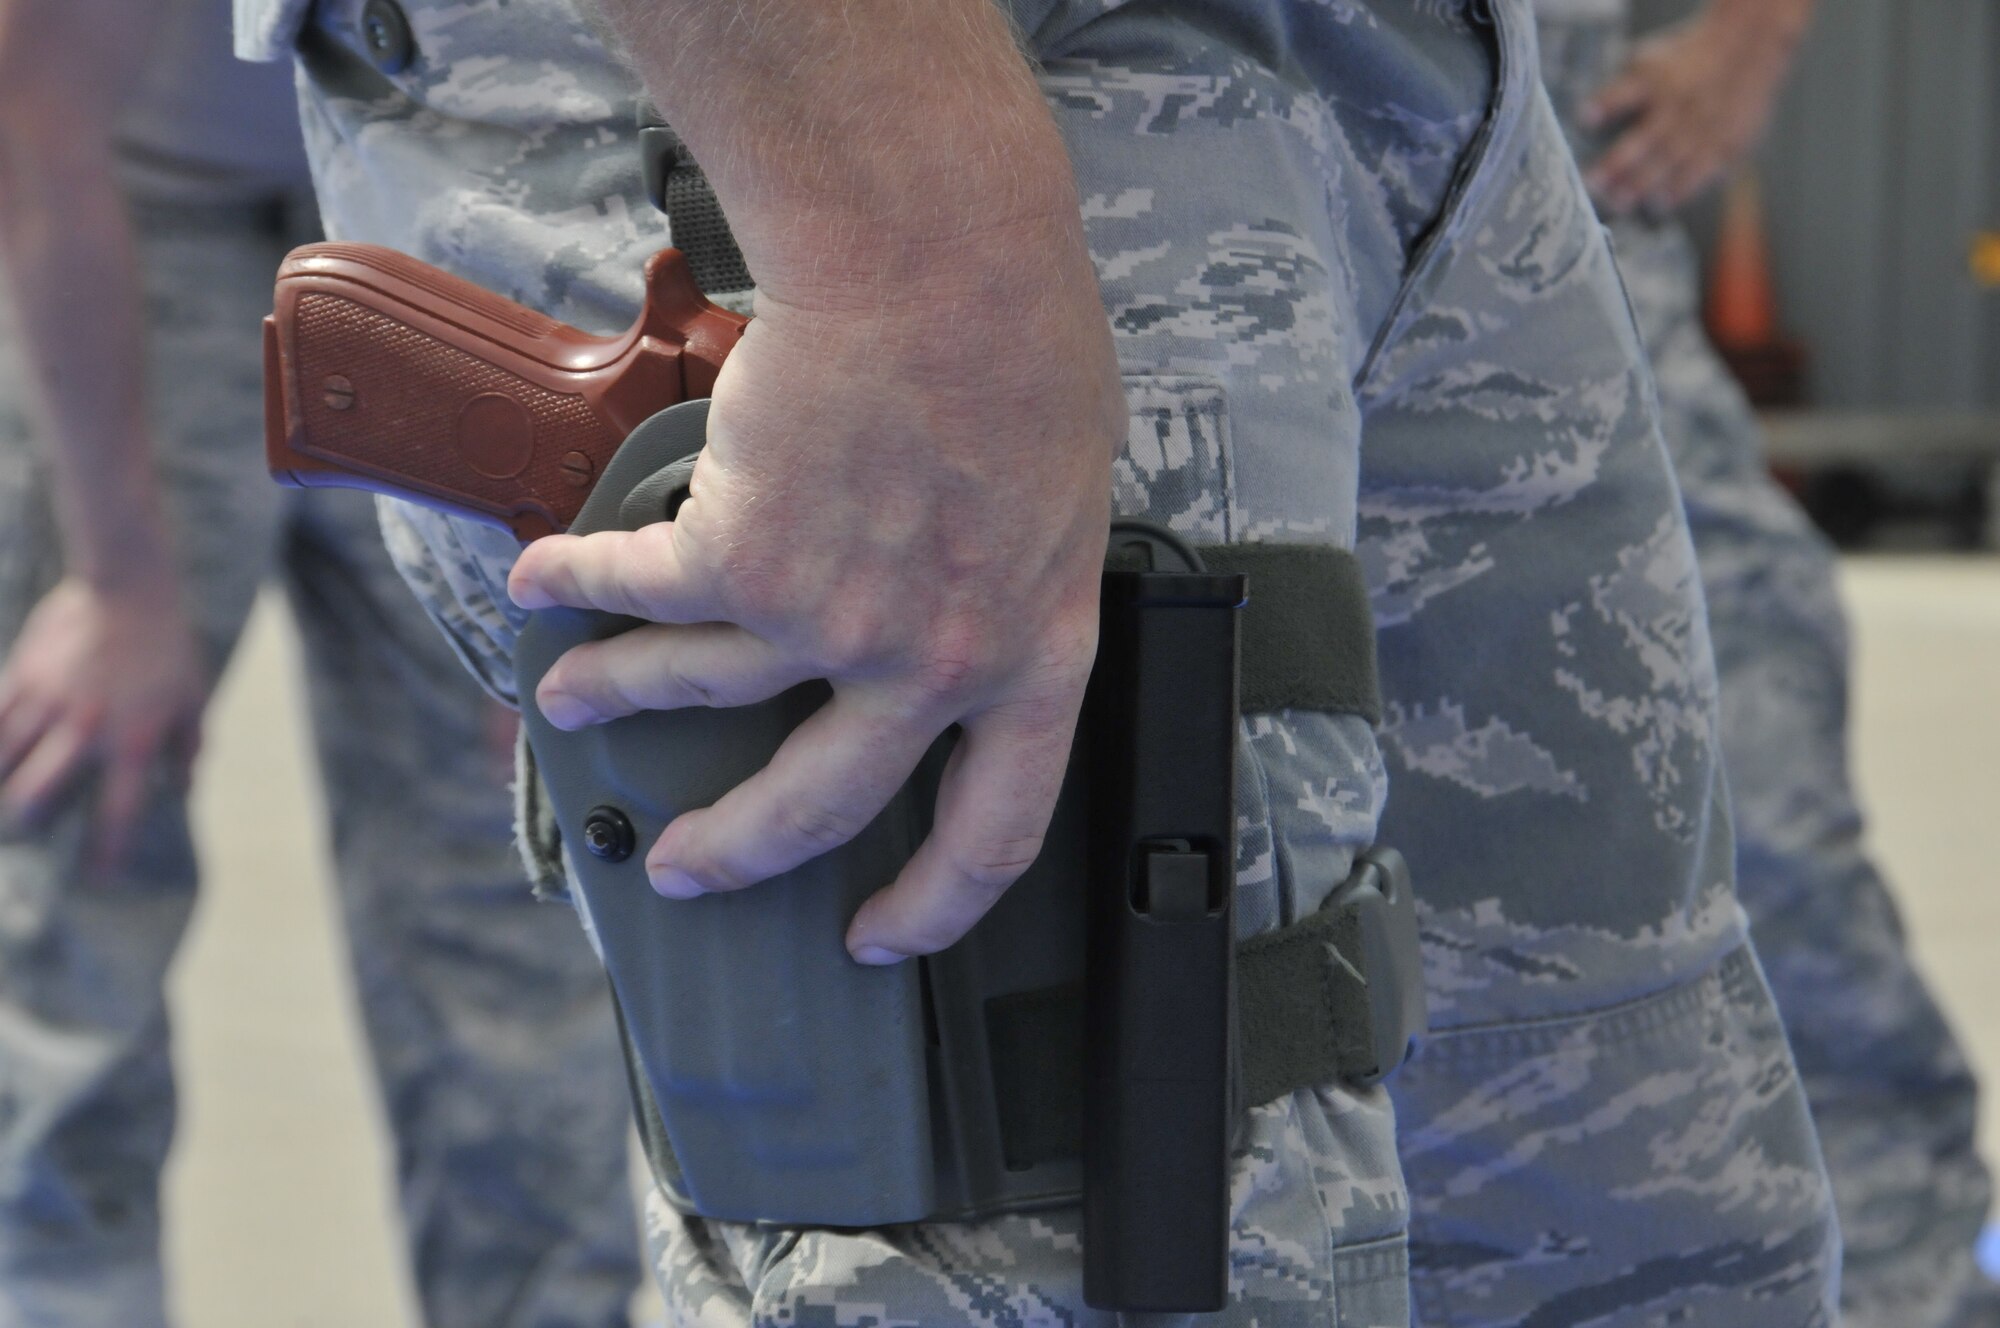 Tech. Sgt. Bradley Hobbs, a 188th Security Forces Squadron combative instructor, secures a training pistol replica in his holster during a training event held at Ebbing Air National Guard Base, Fort Smith, Arkansas, Sept. 6, 2014. The event, held during a unit training assembly, strengthened the squadron’s mission readiness. (U.S. Air National Guard photo by Staff Sgt. John Suleski/Released)